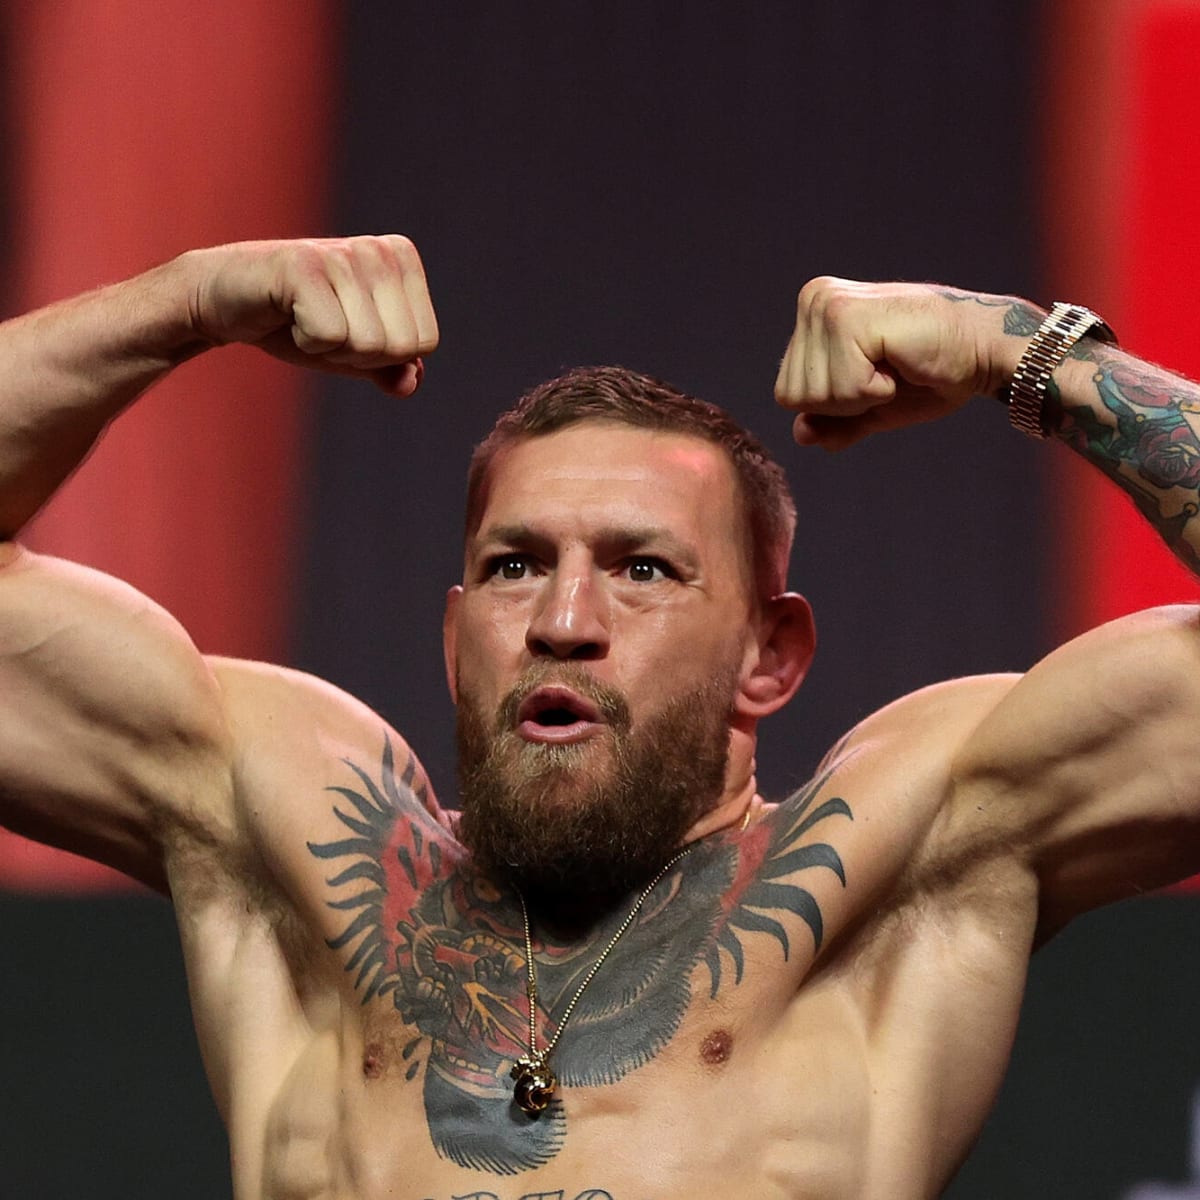 The Best MMA Fighters By Weight Class